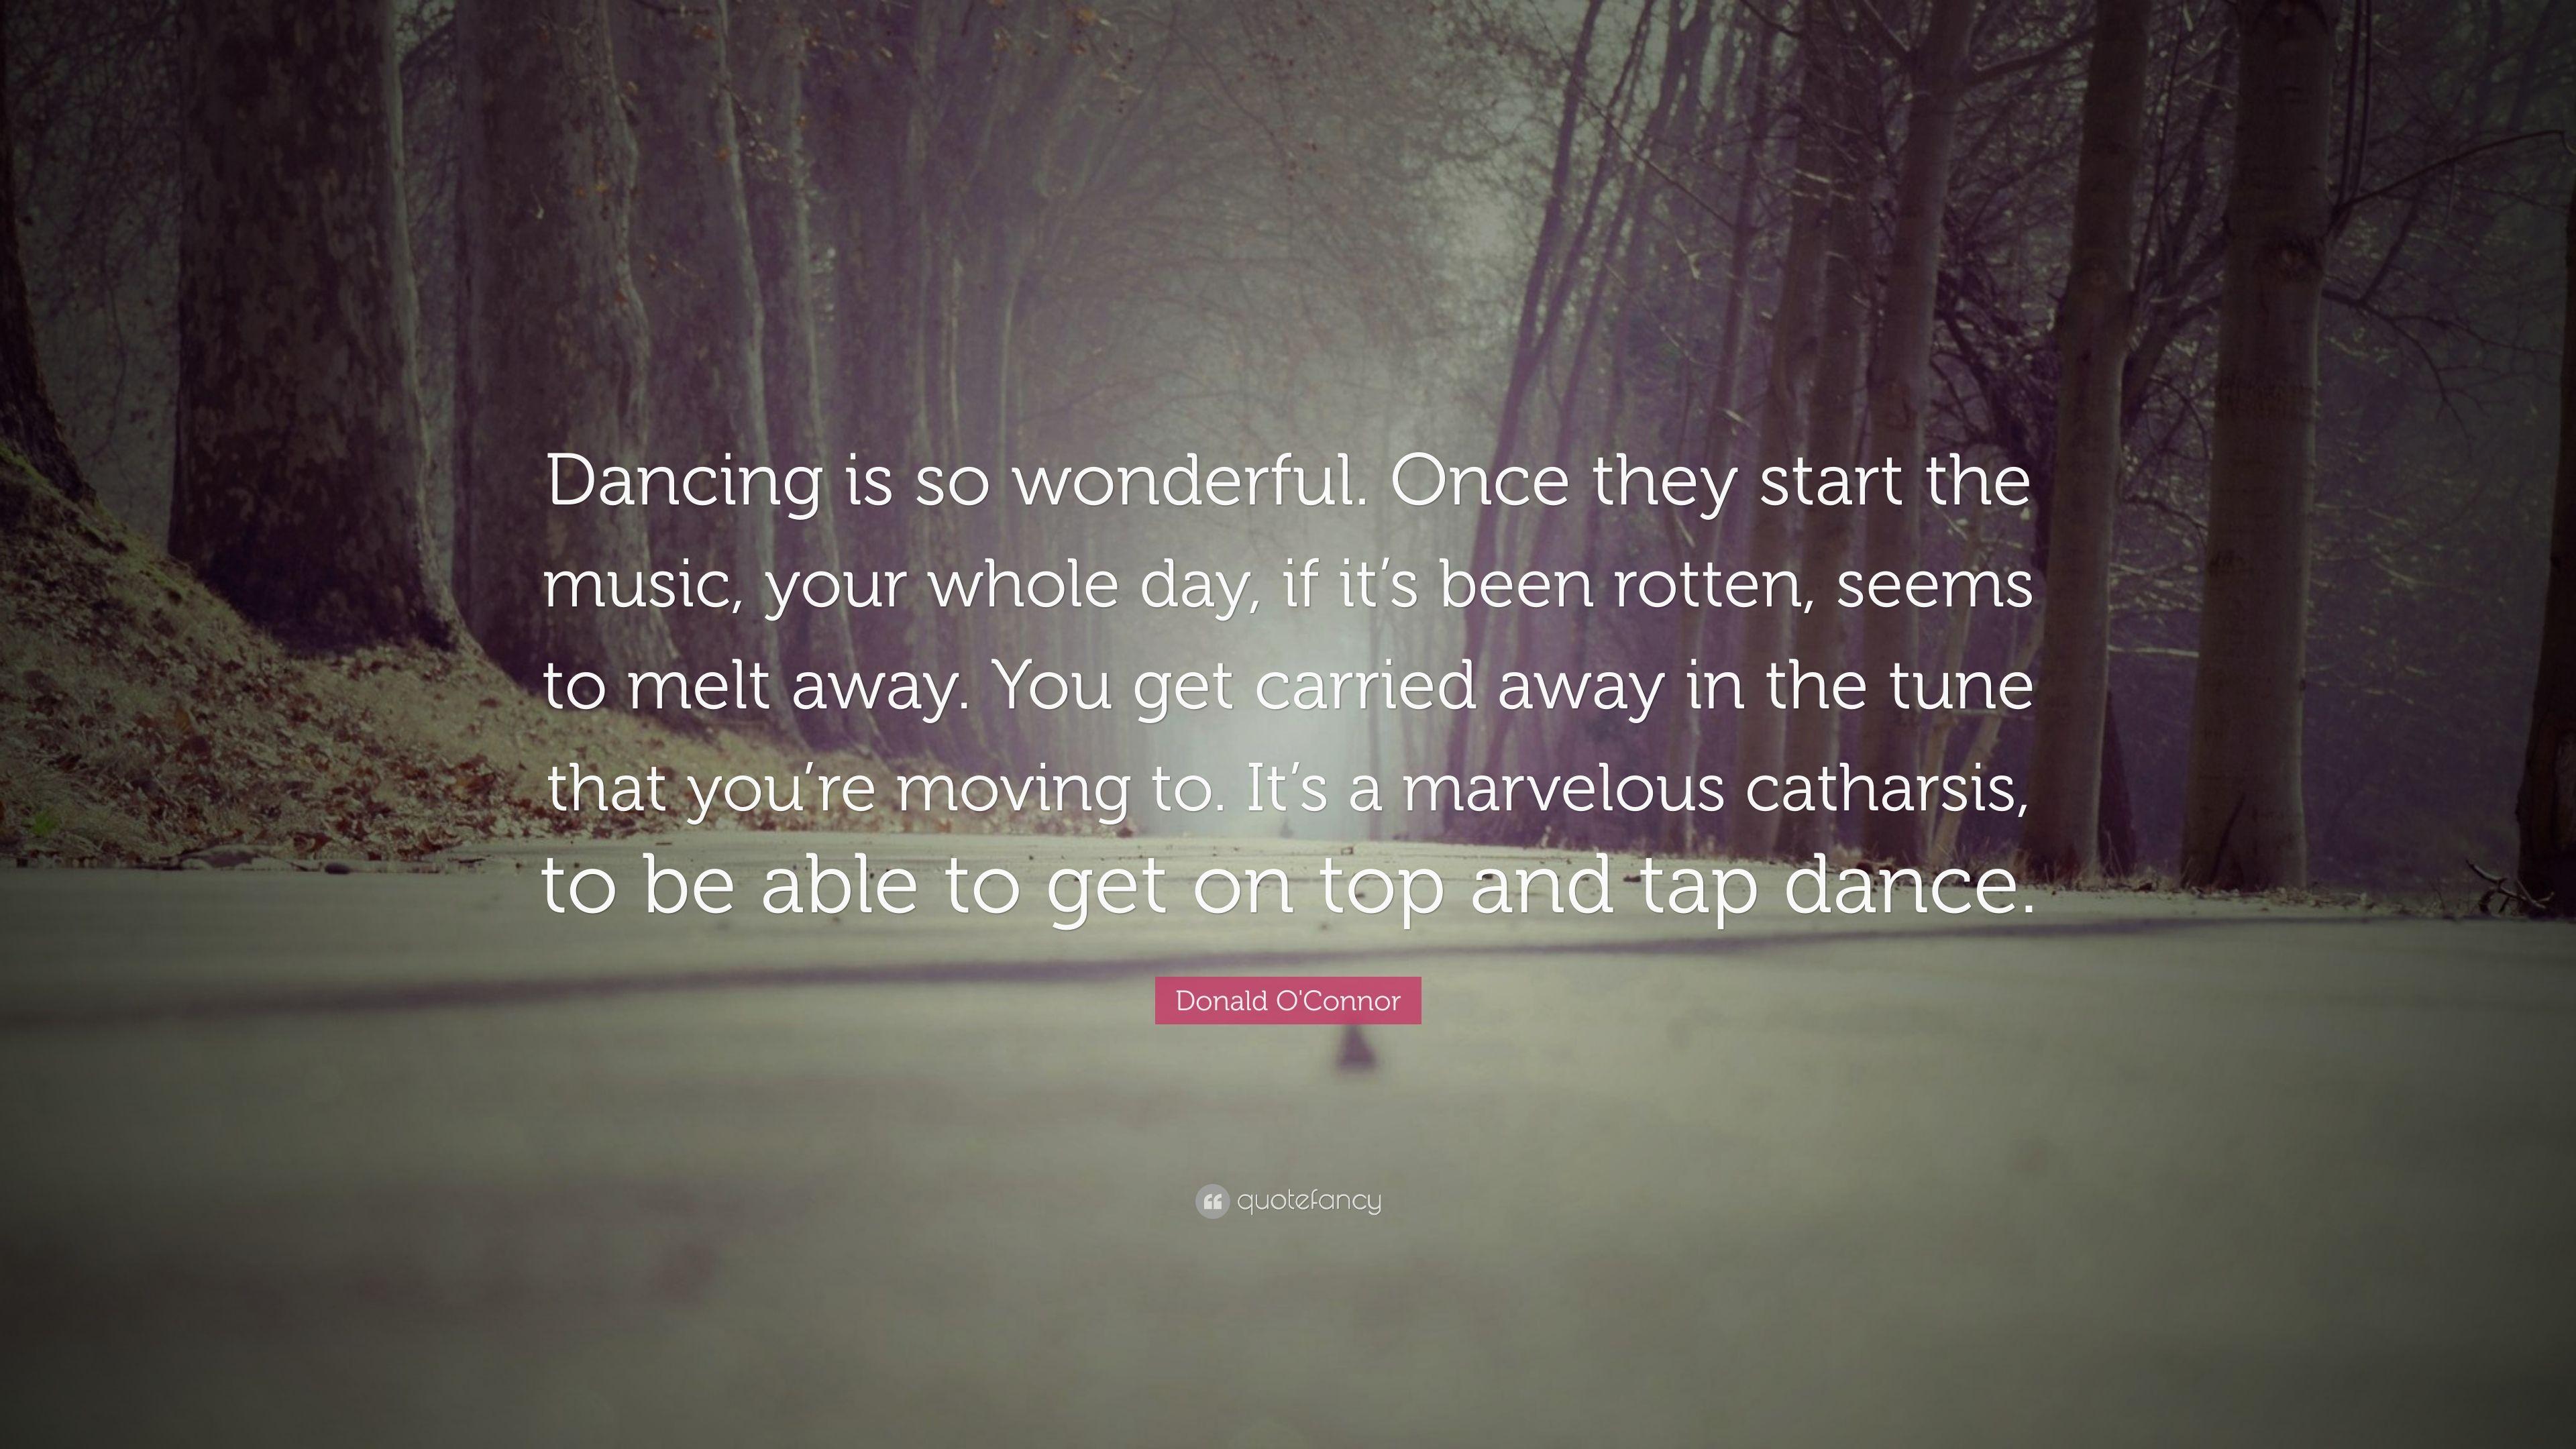 Donald O'Connor Quote: “Dancing is so wonderful. Once they start